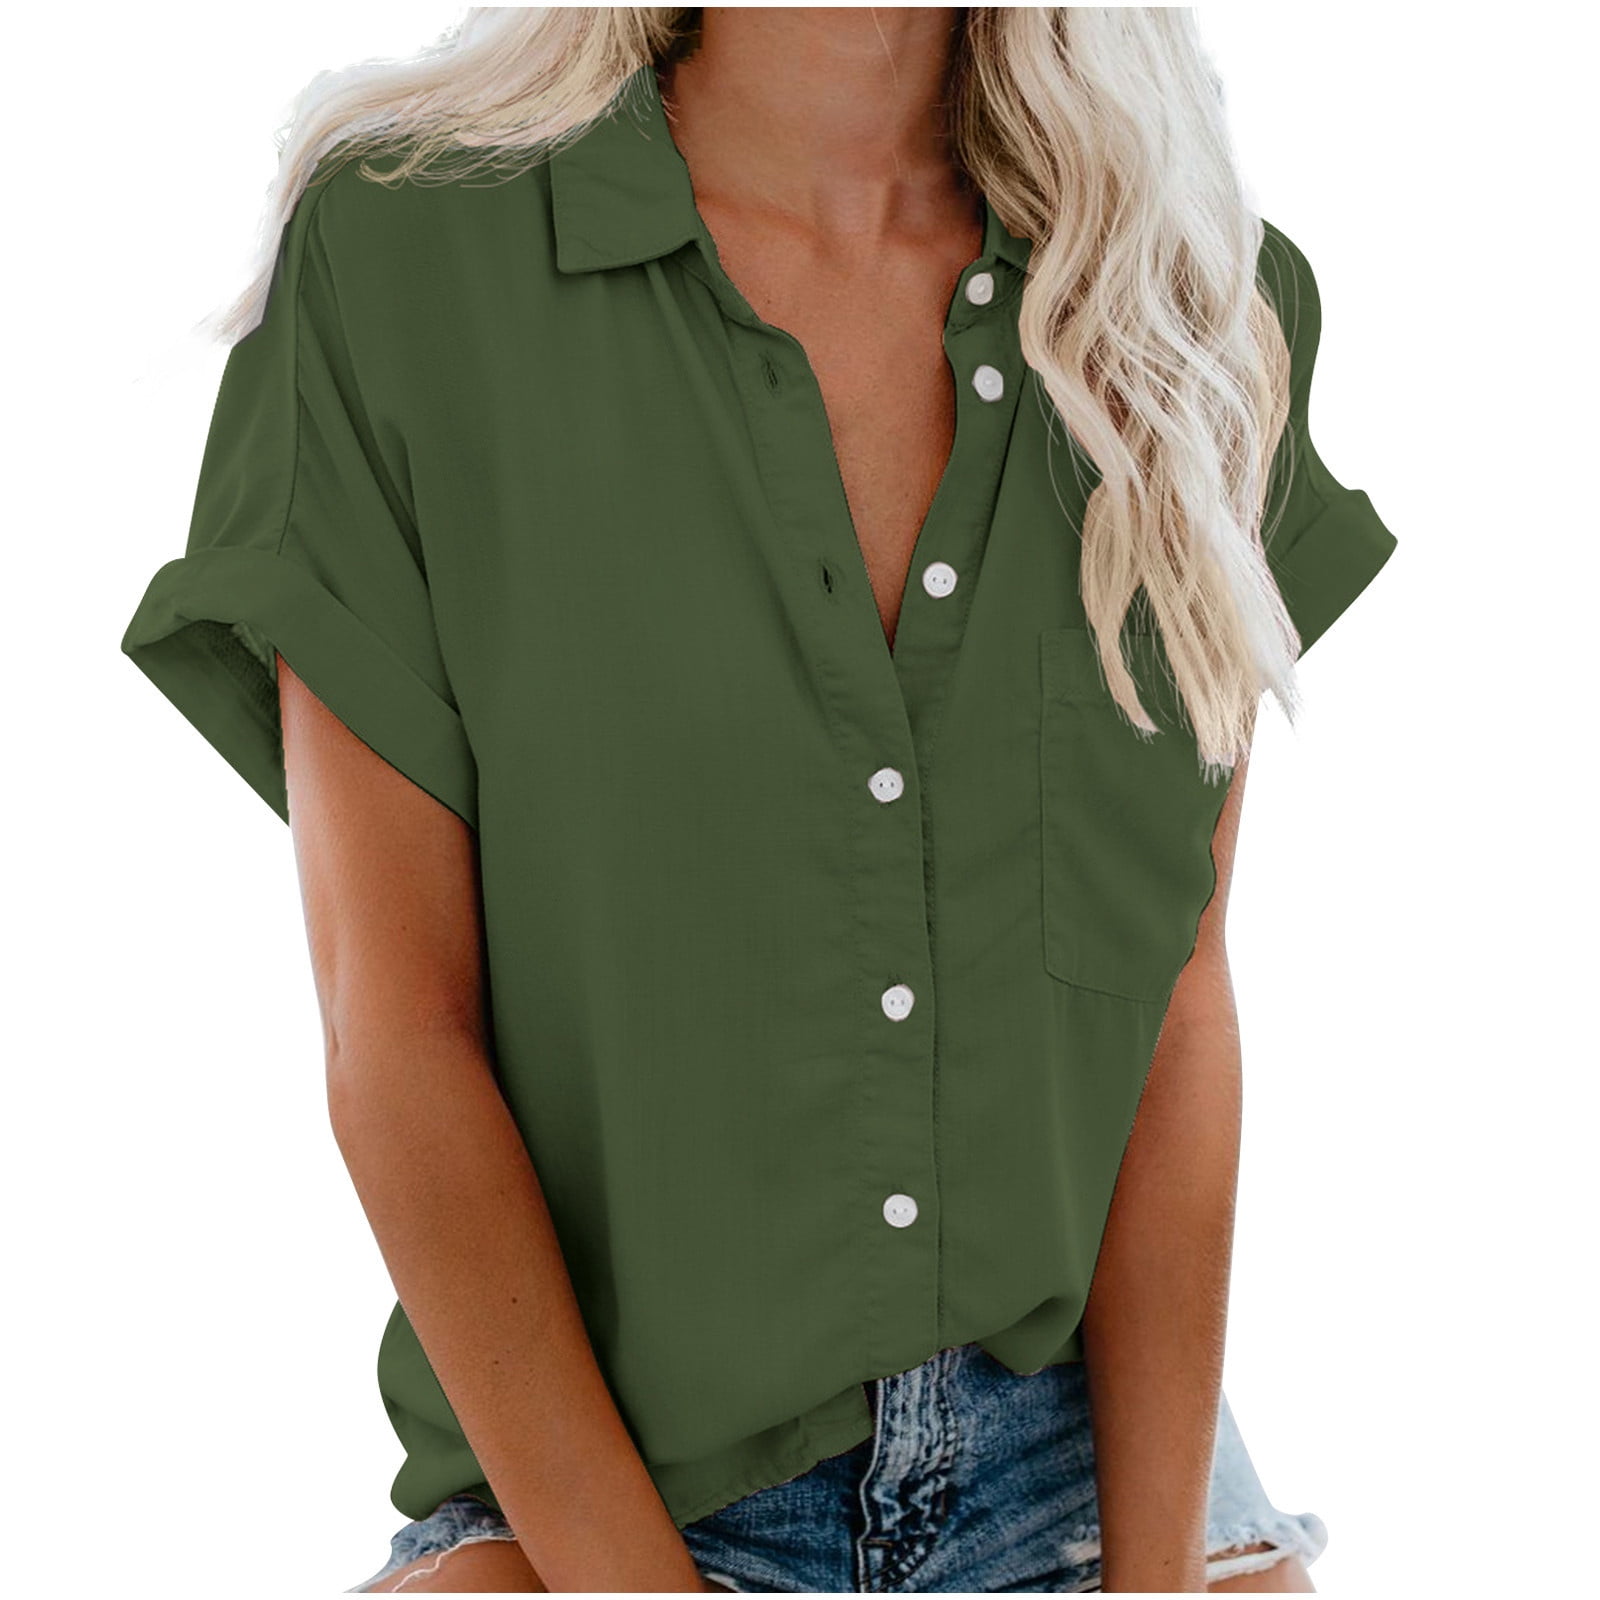 QENGING Womens Tops Plus Size Trendy Button Down Tees Causal